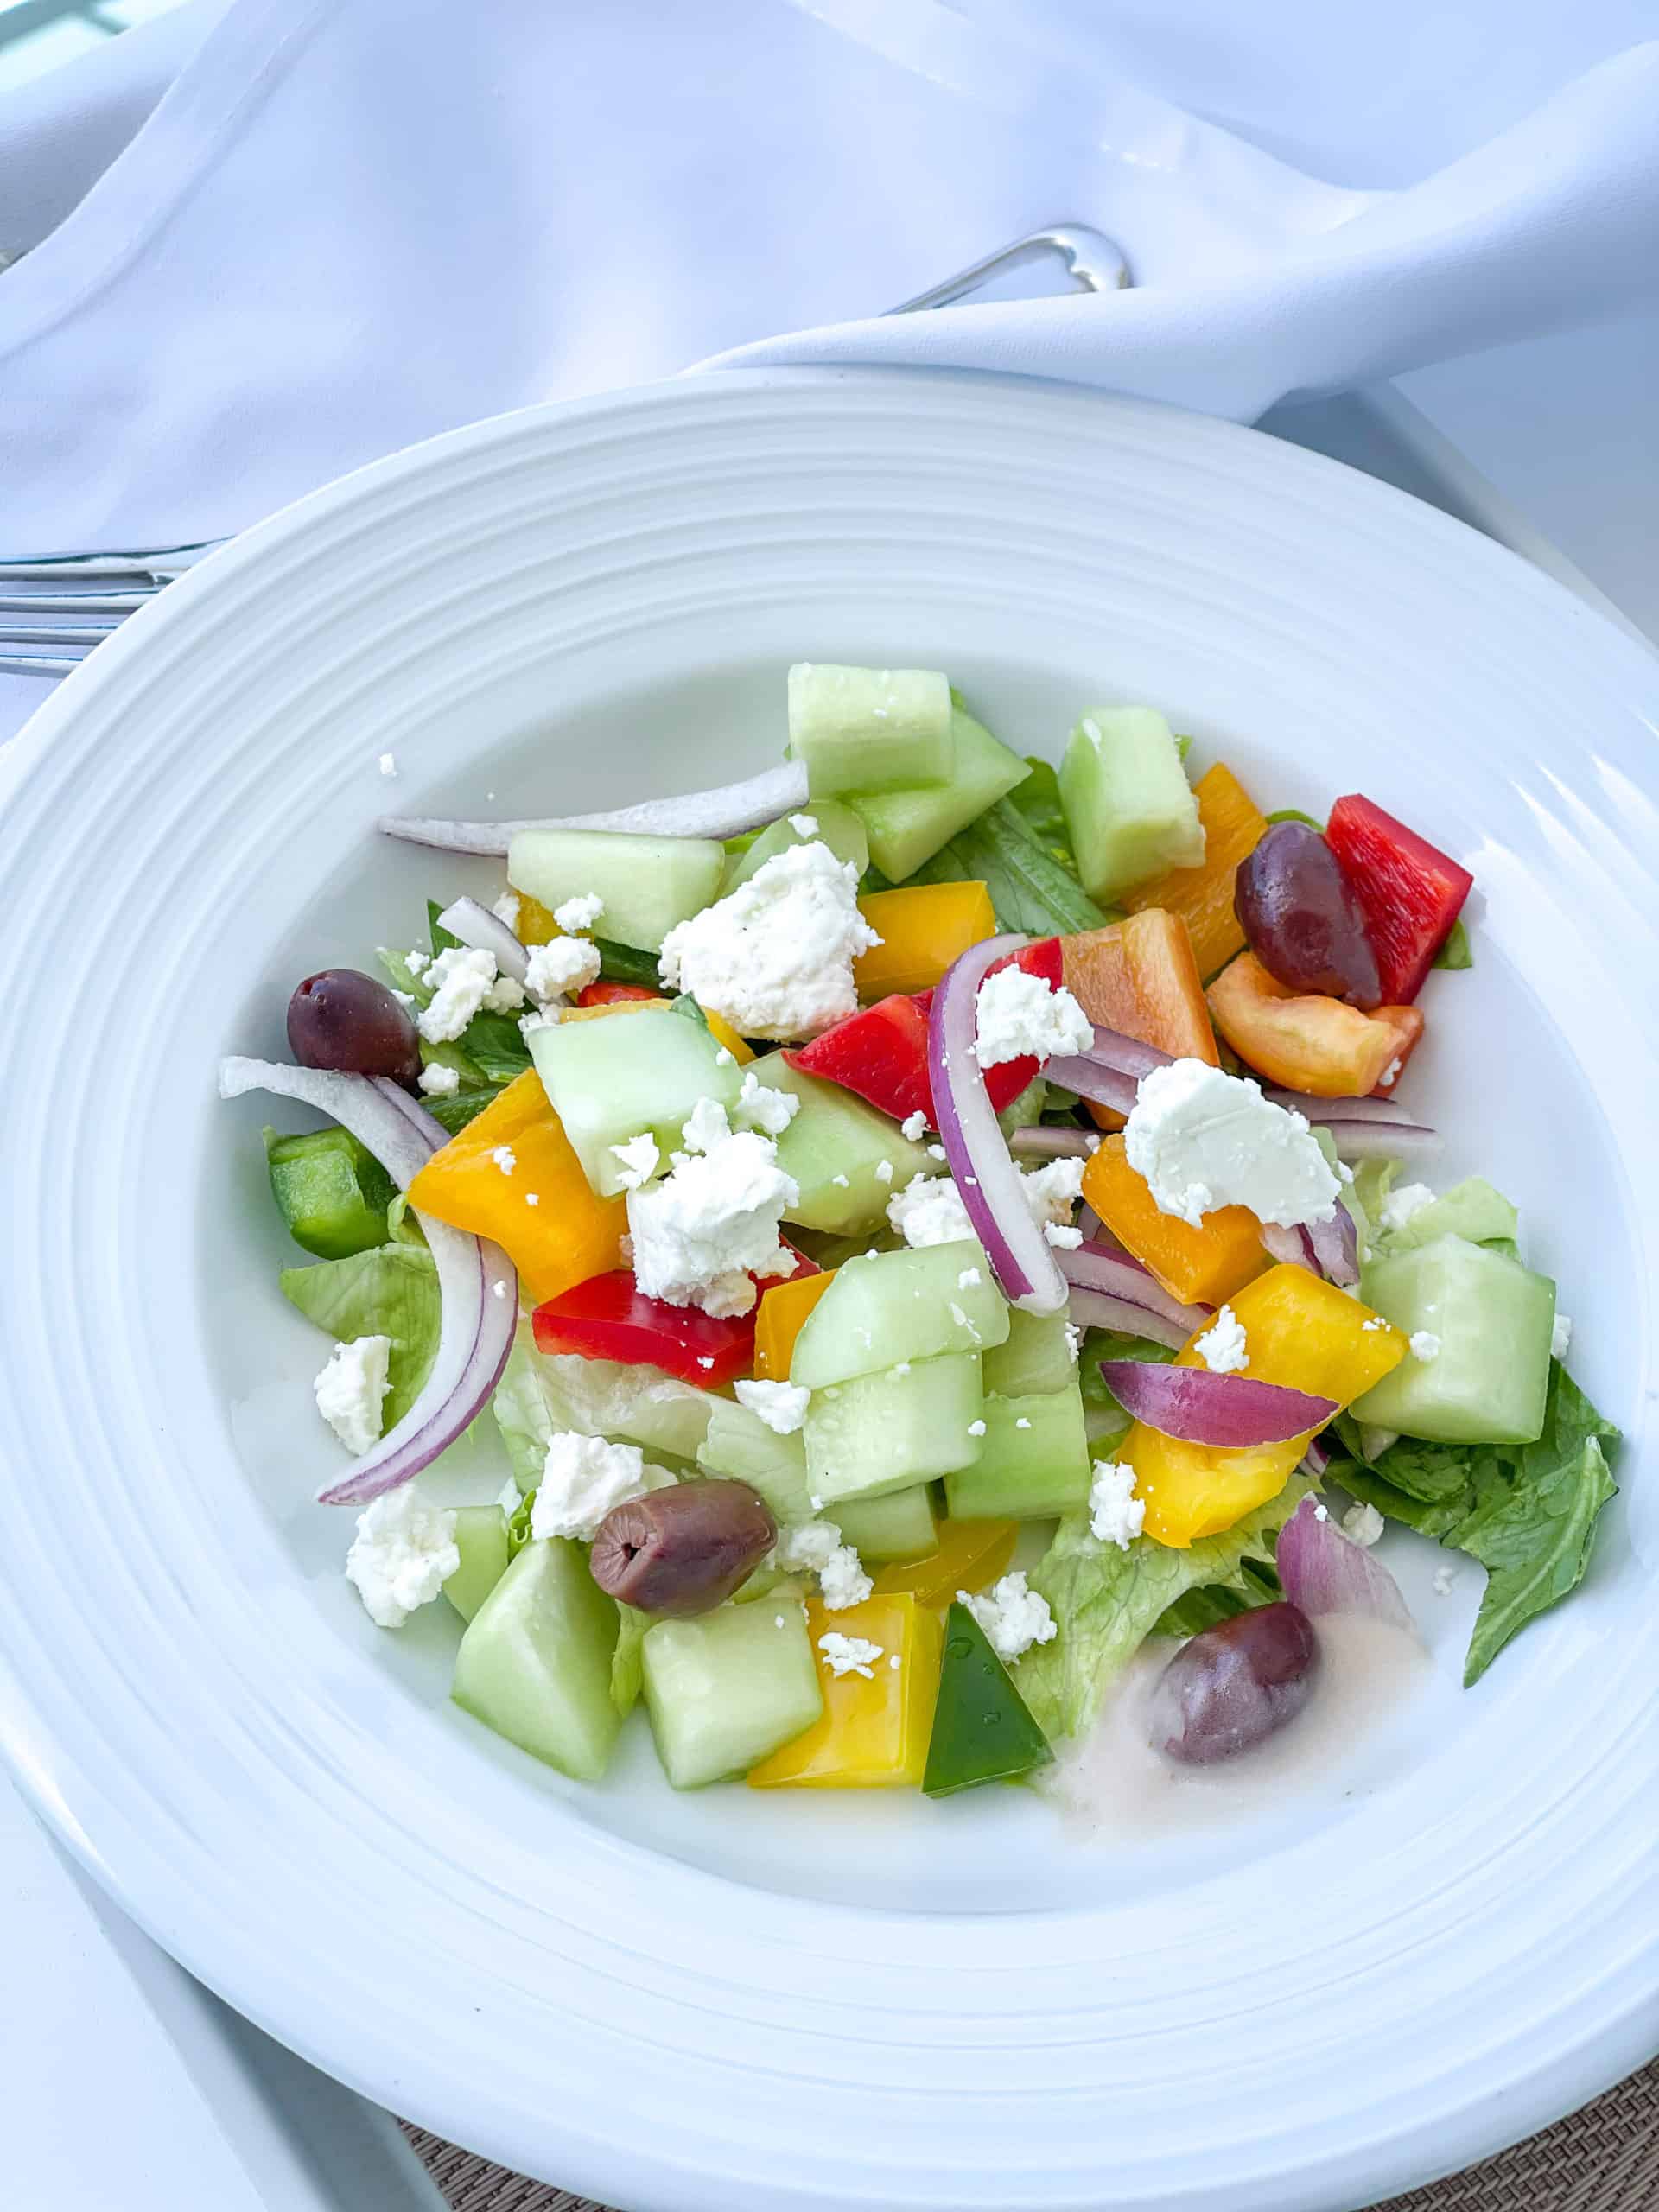 Discovery Princes Review - Greek Salad